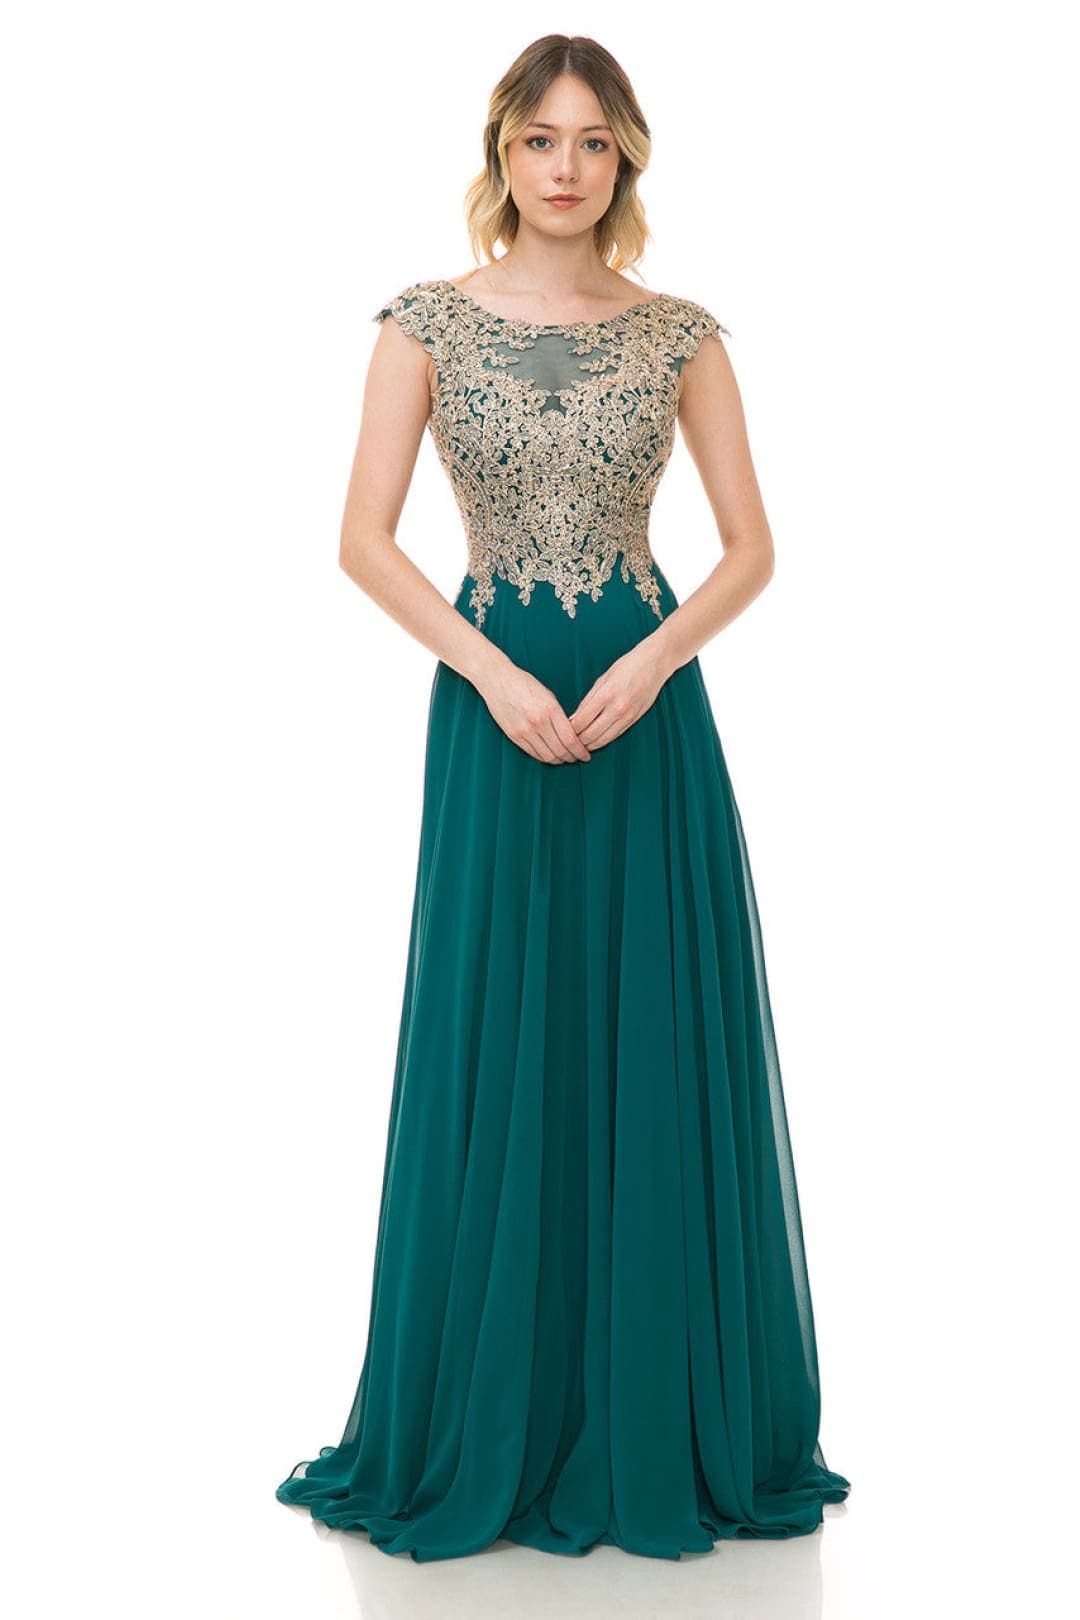 Classy Special Occasion Gown - HUNTER GREEN / XS